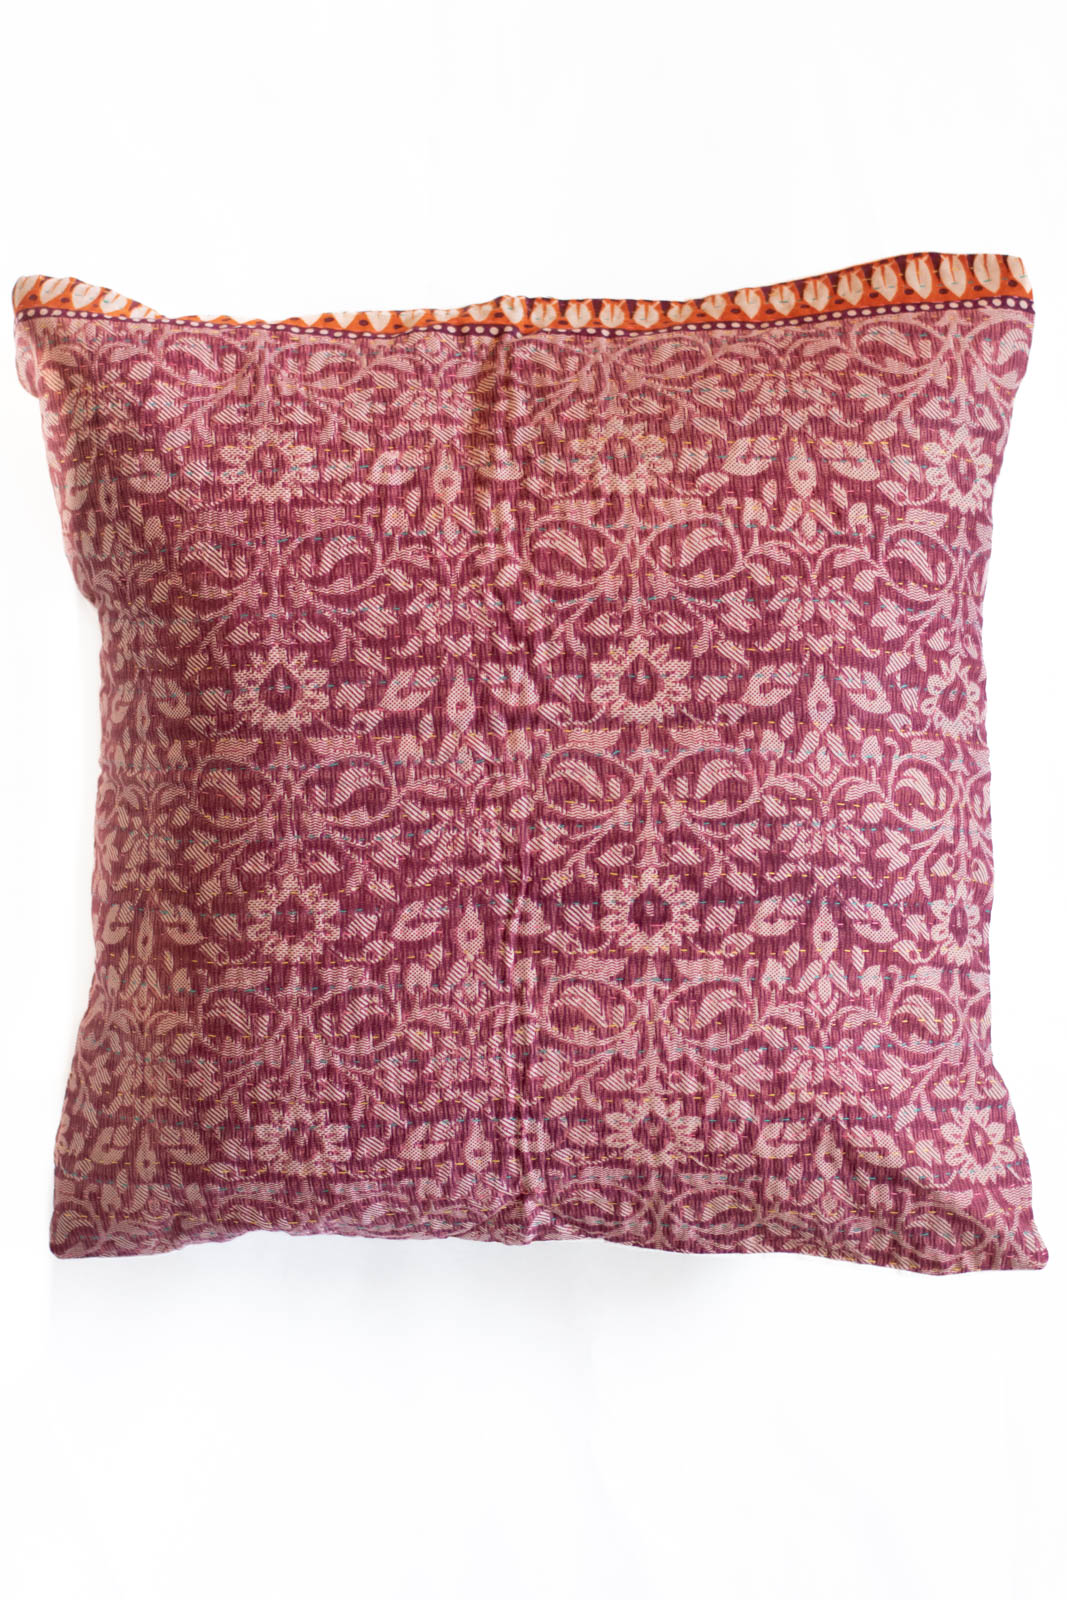 Dignity no. 6 Kantha Pillow Cover